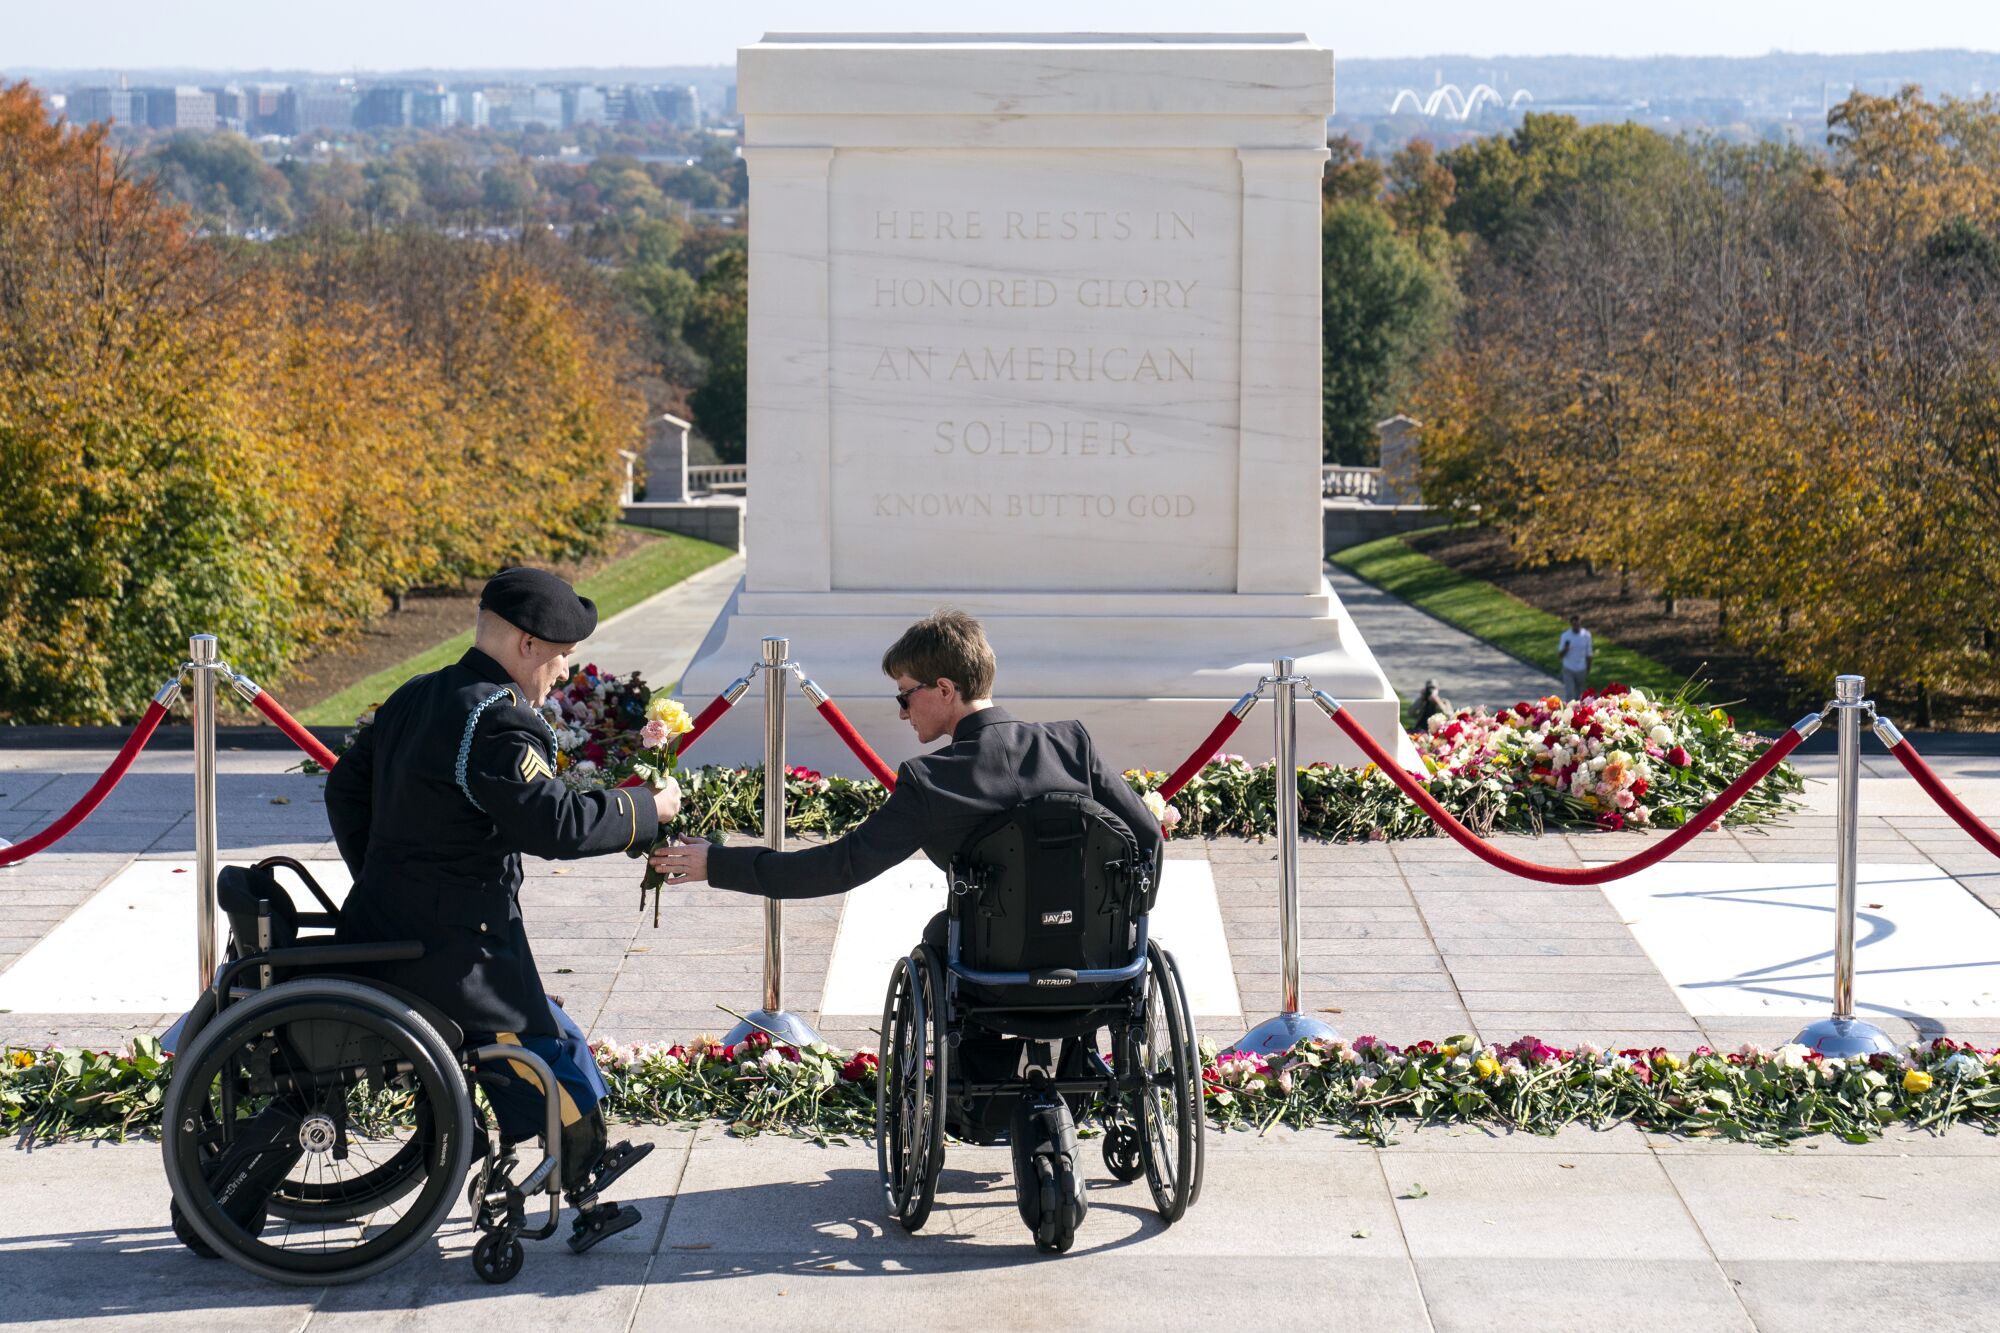 U.S. Army Sgt. Brian Pomerville, left, and his wife Tiffany Lee, both from Roanoke, Va., prepare to place flowers.